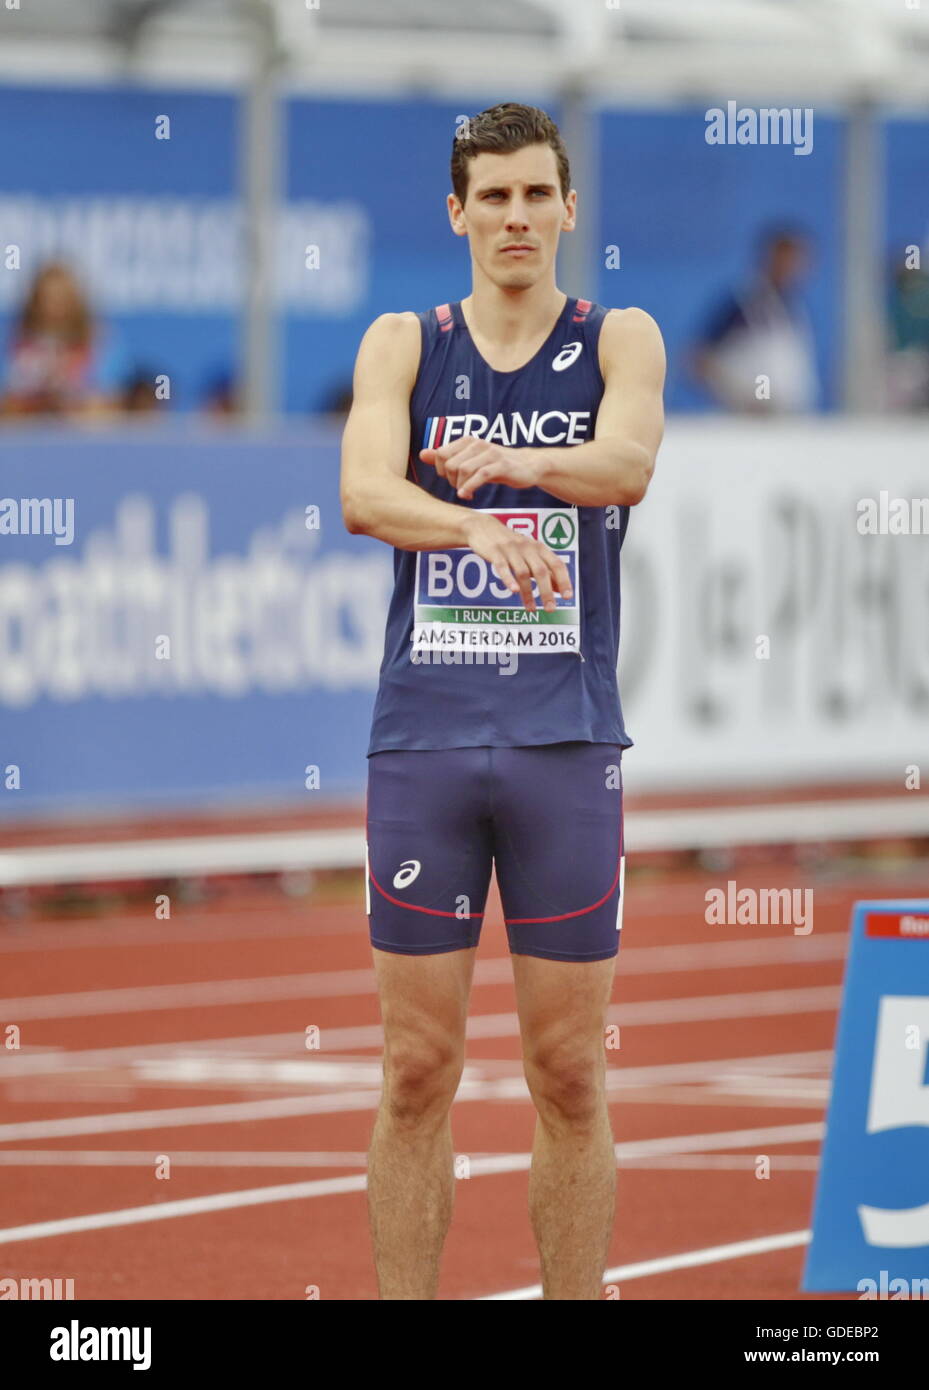 Amsterdam, Netherlands July 10, 2016 Pierre - Ambroise Bosse in 800m final the European Championship in Amsterdam Stock Photo - Alamy